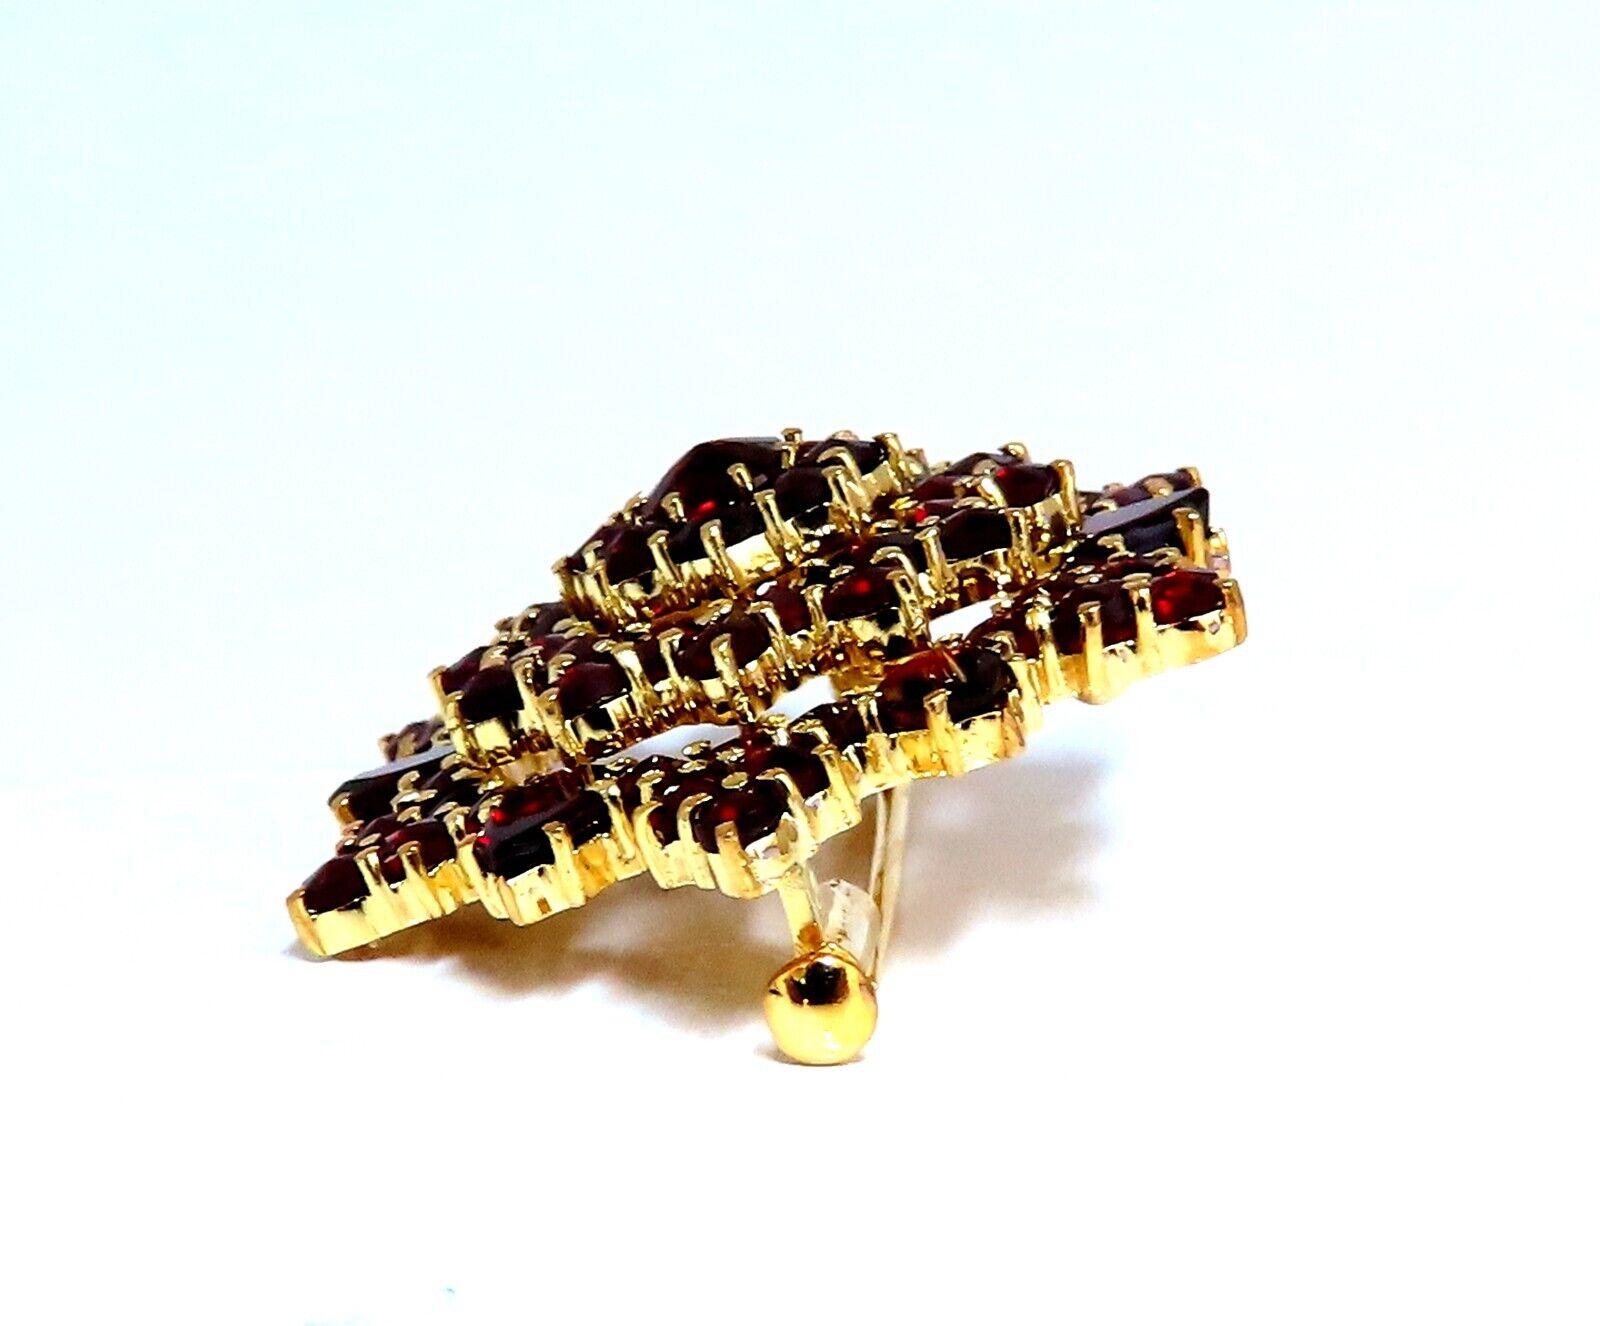 Cosmopolitan Deco Cluster Pin

Very Well Made



3.50ct natural Garnets

30 x 26mm

14kt. yellow gold 

9.2 Grams.